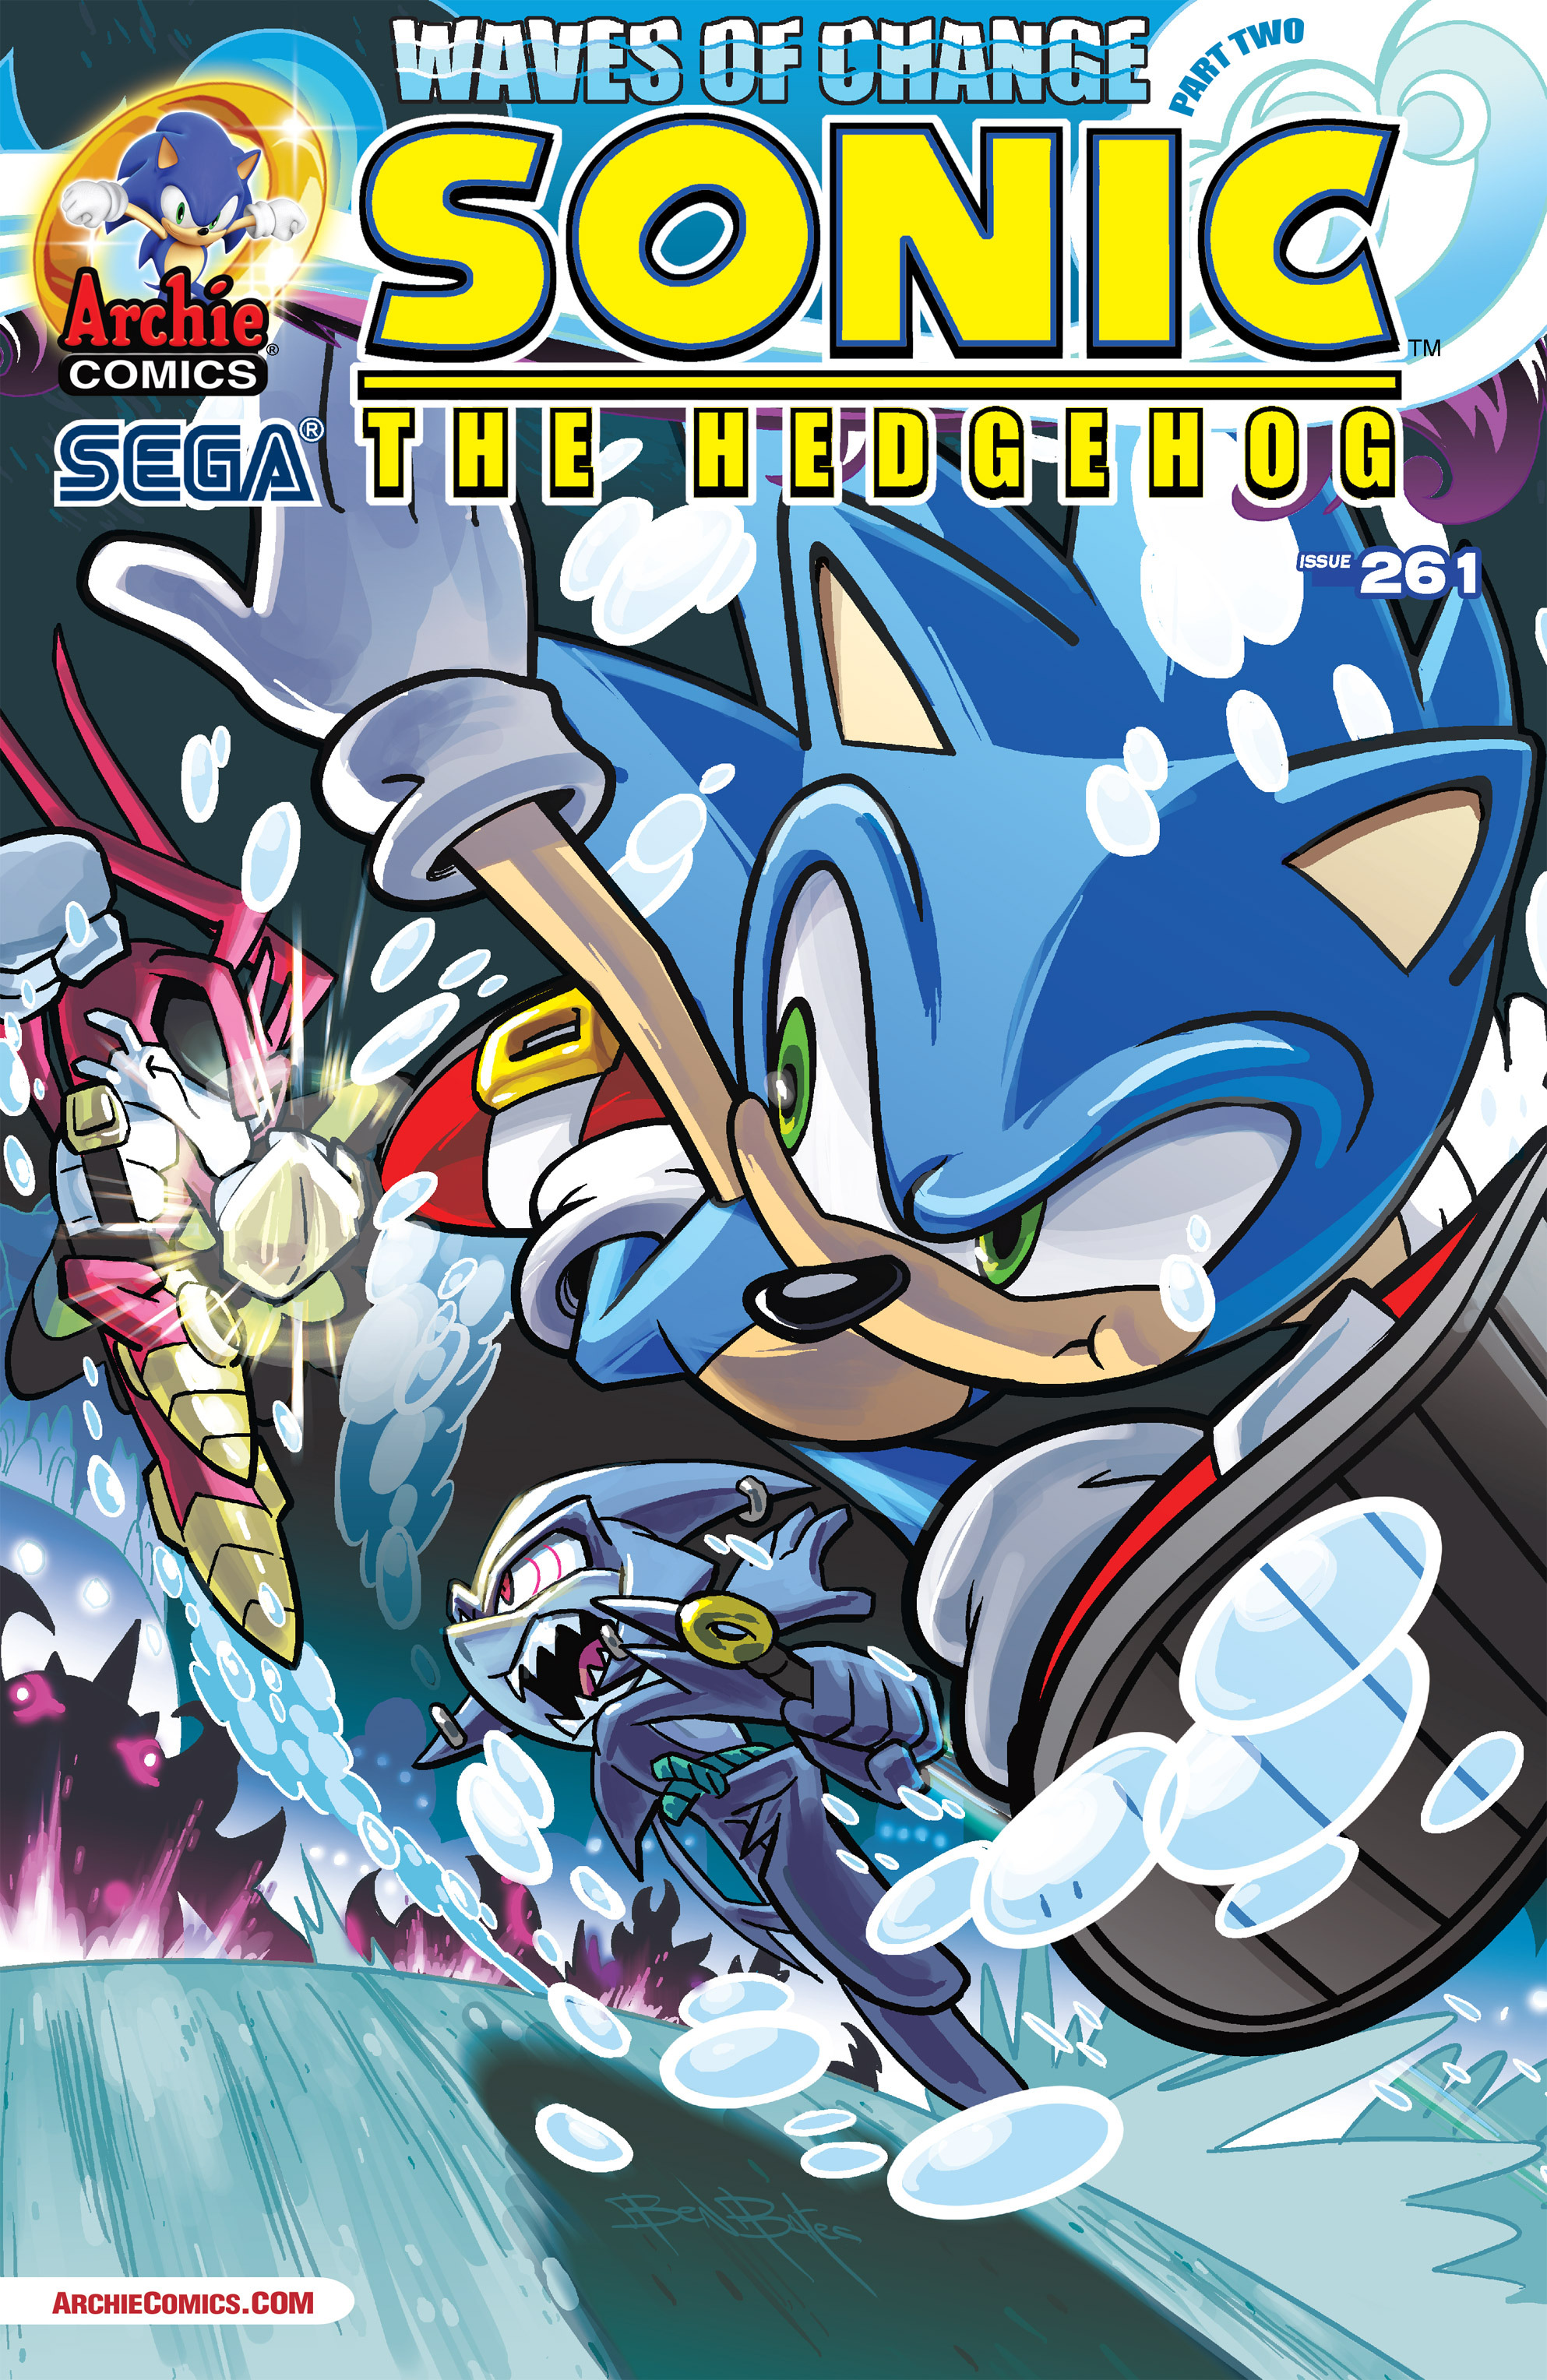 Archie Sonic the Hedgehog Issue 261 | Sonic News Network | FANDOM powered by Wikia